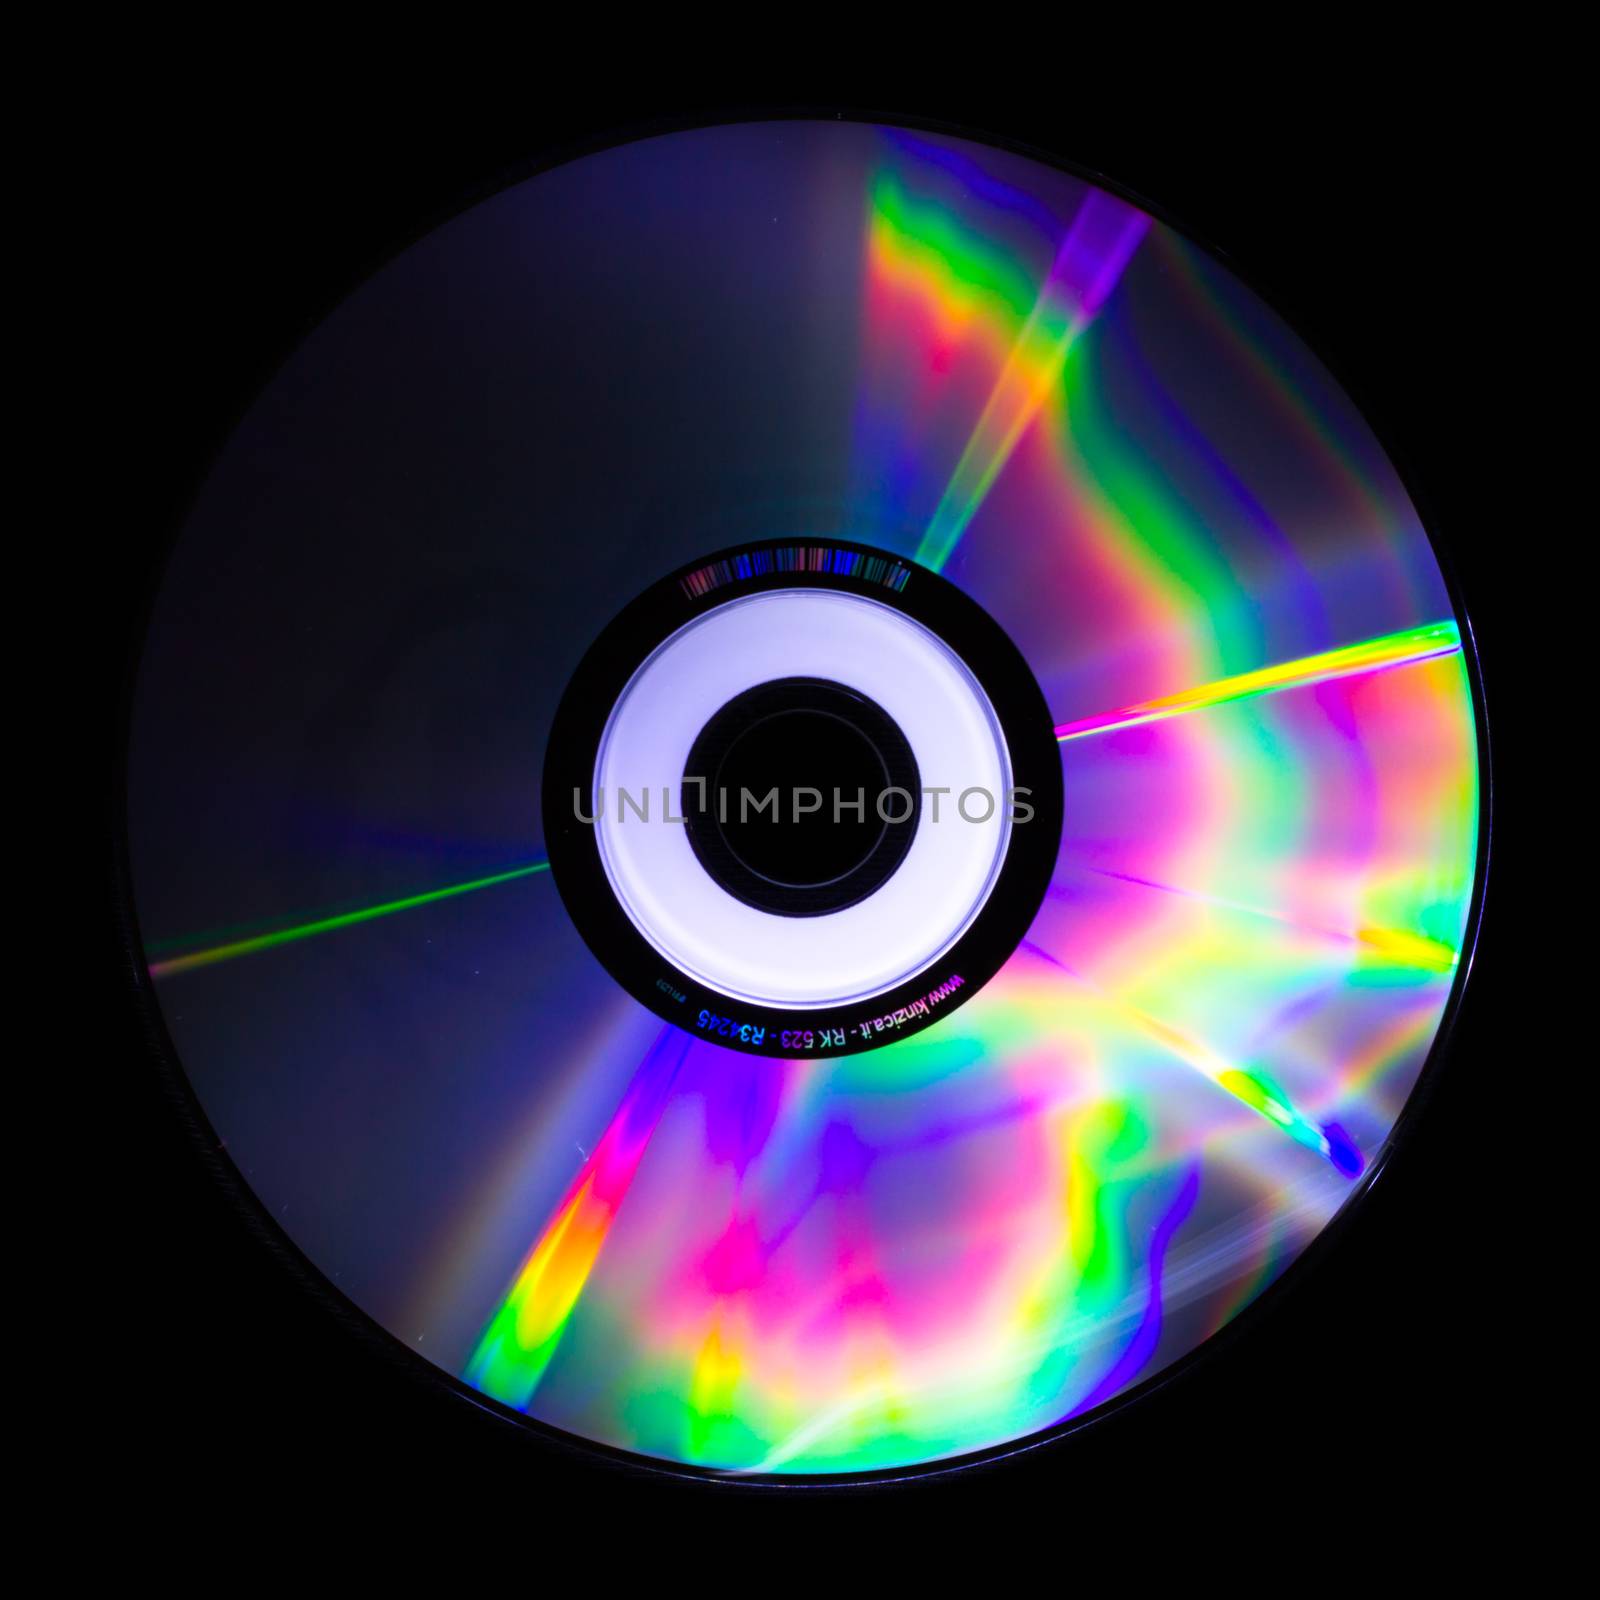 the light reflected from a CD is a collection of psychedelic colors